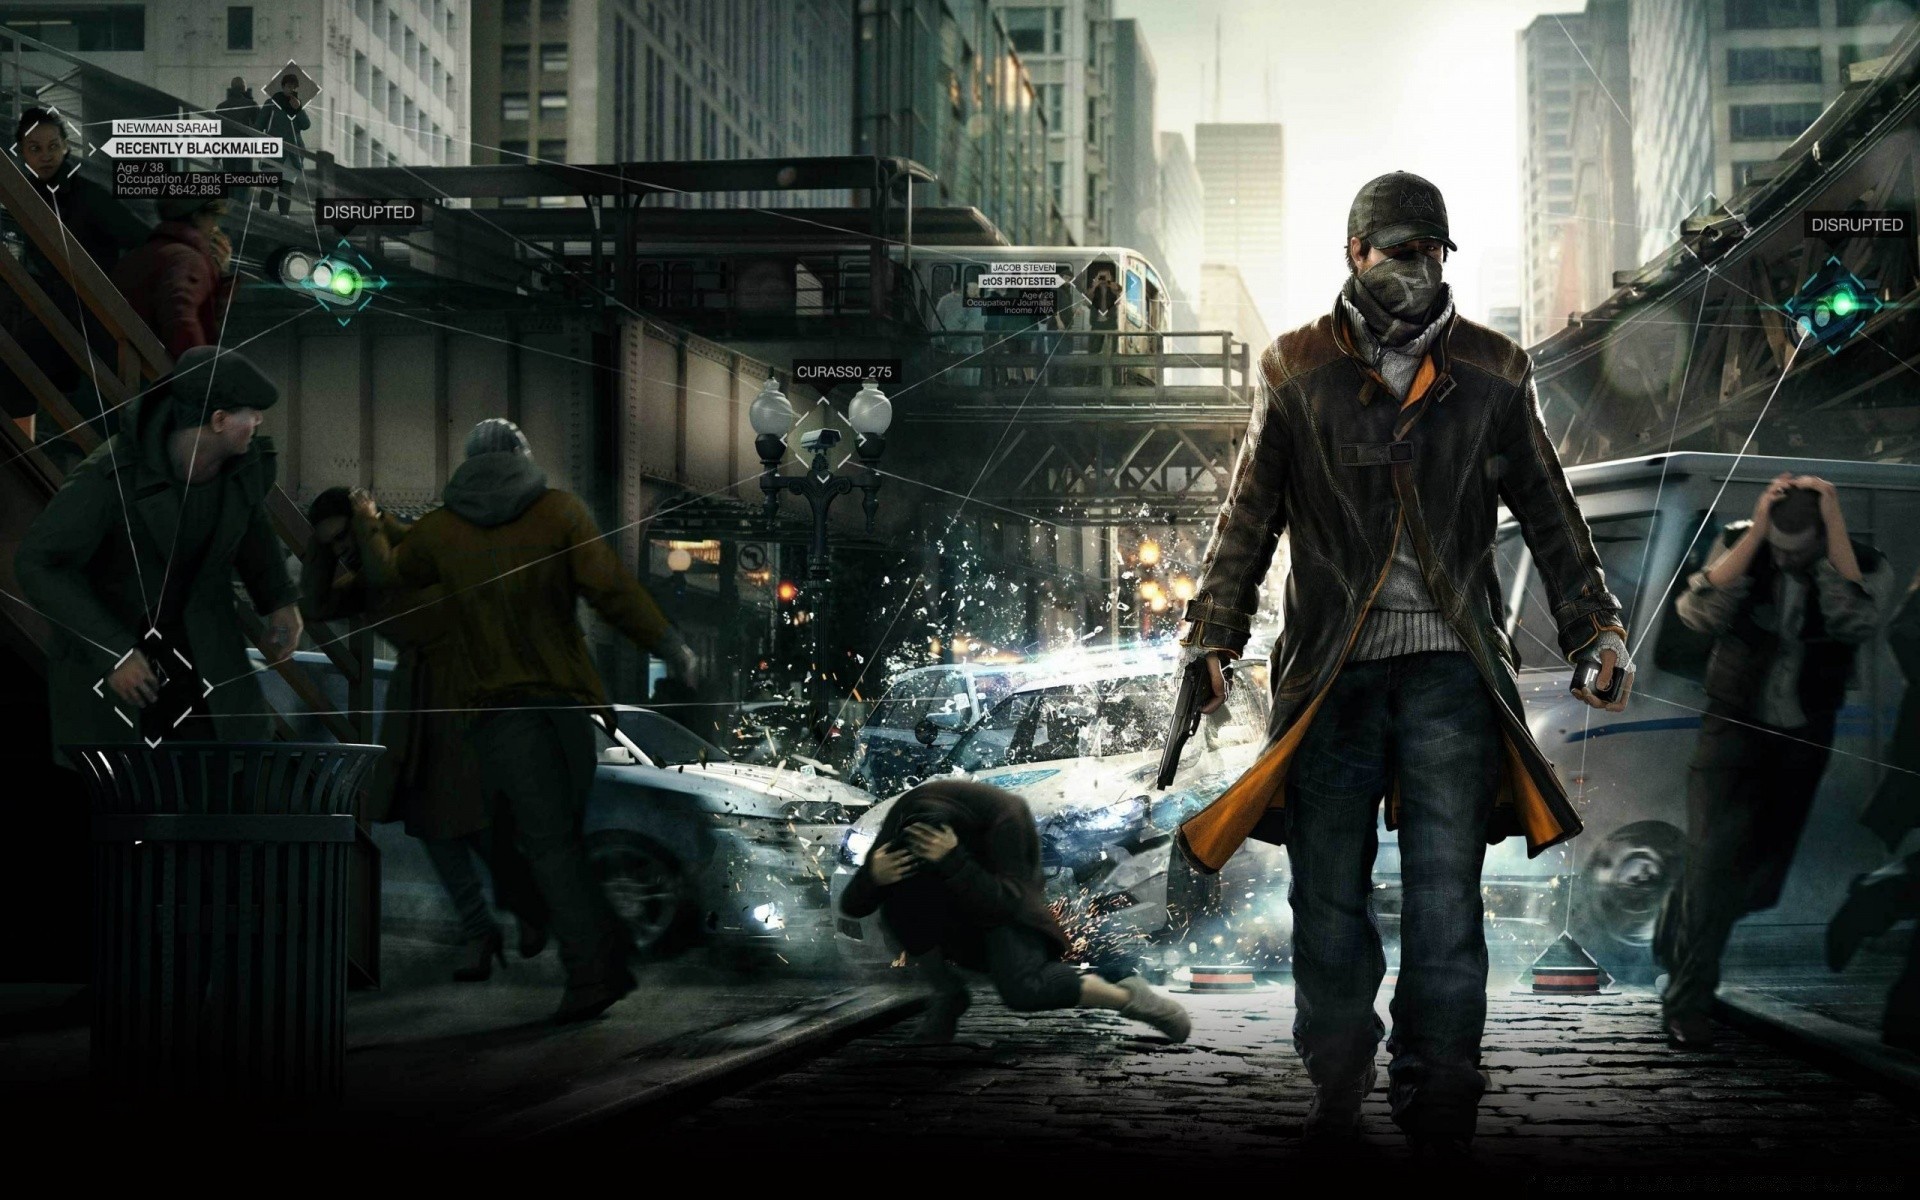 watch_dogs group adult police rebellion wear battle woman offense flame man calamity city one street weapon